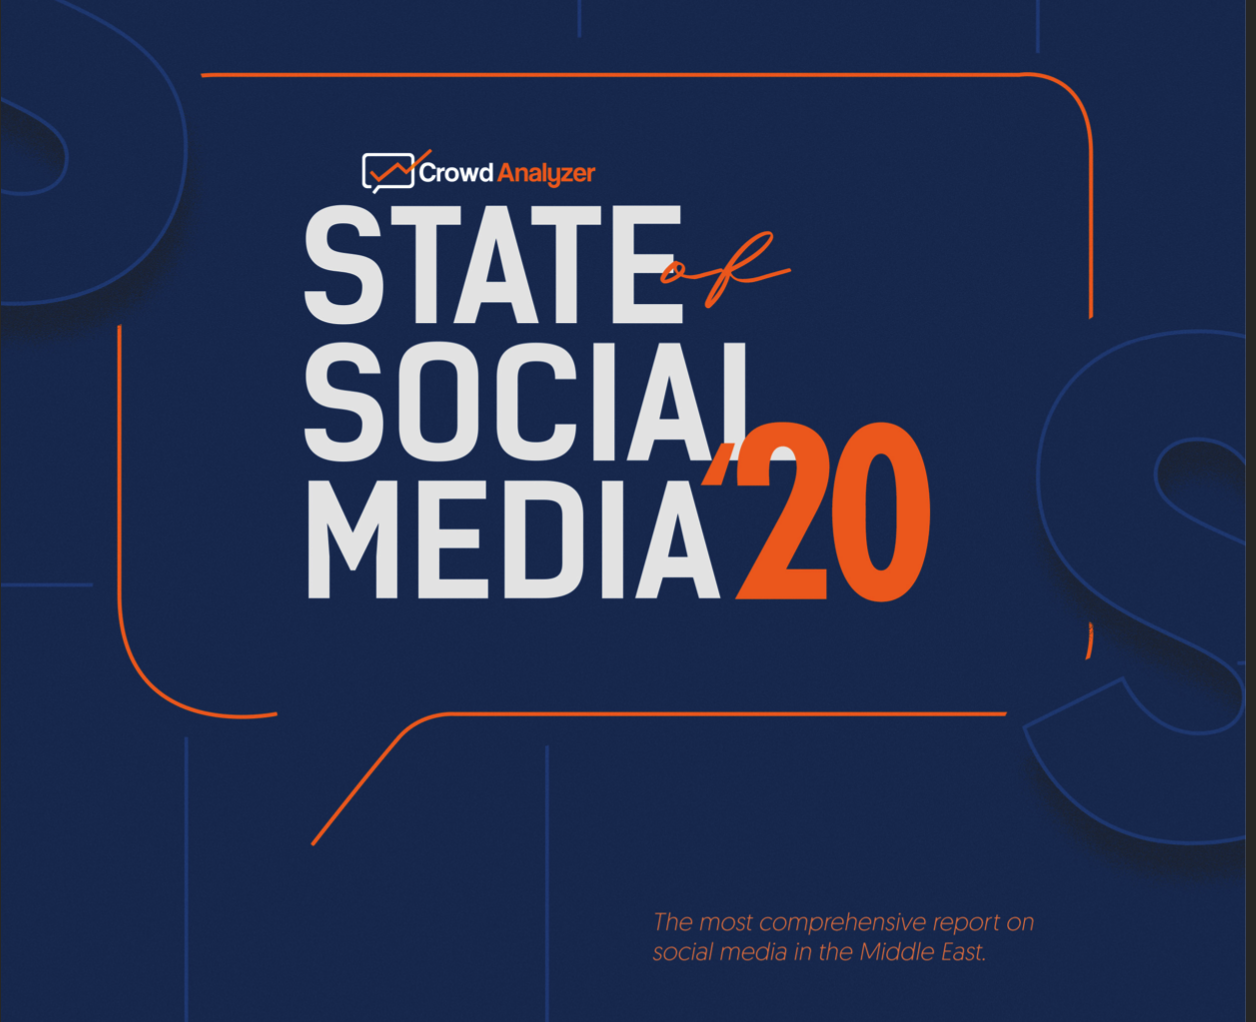 Highlights From the State of Social Media Report 2020